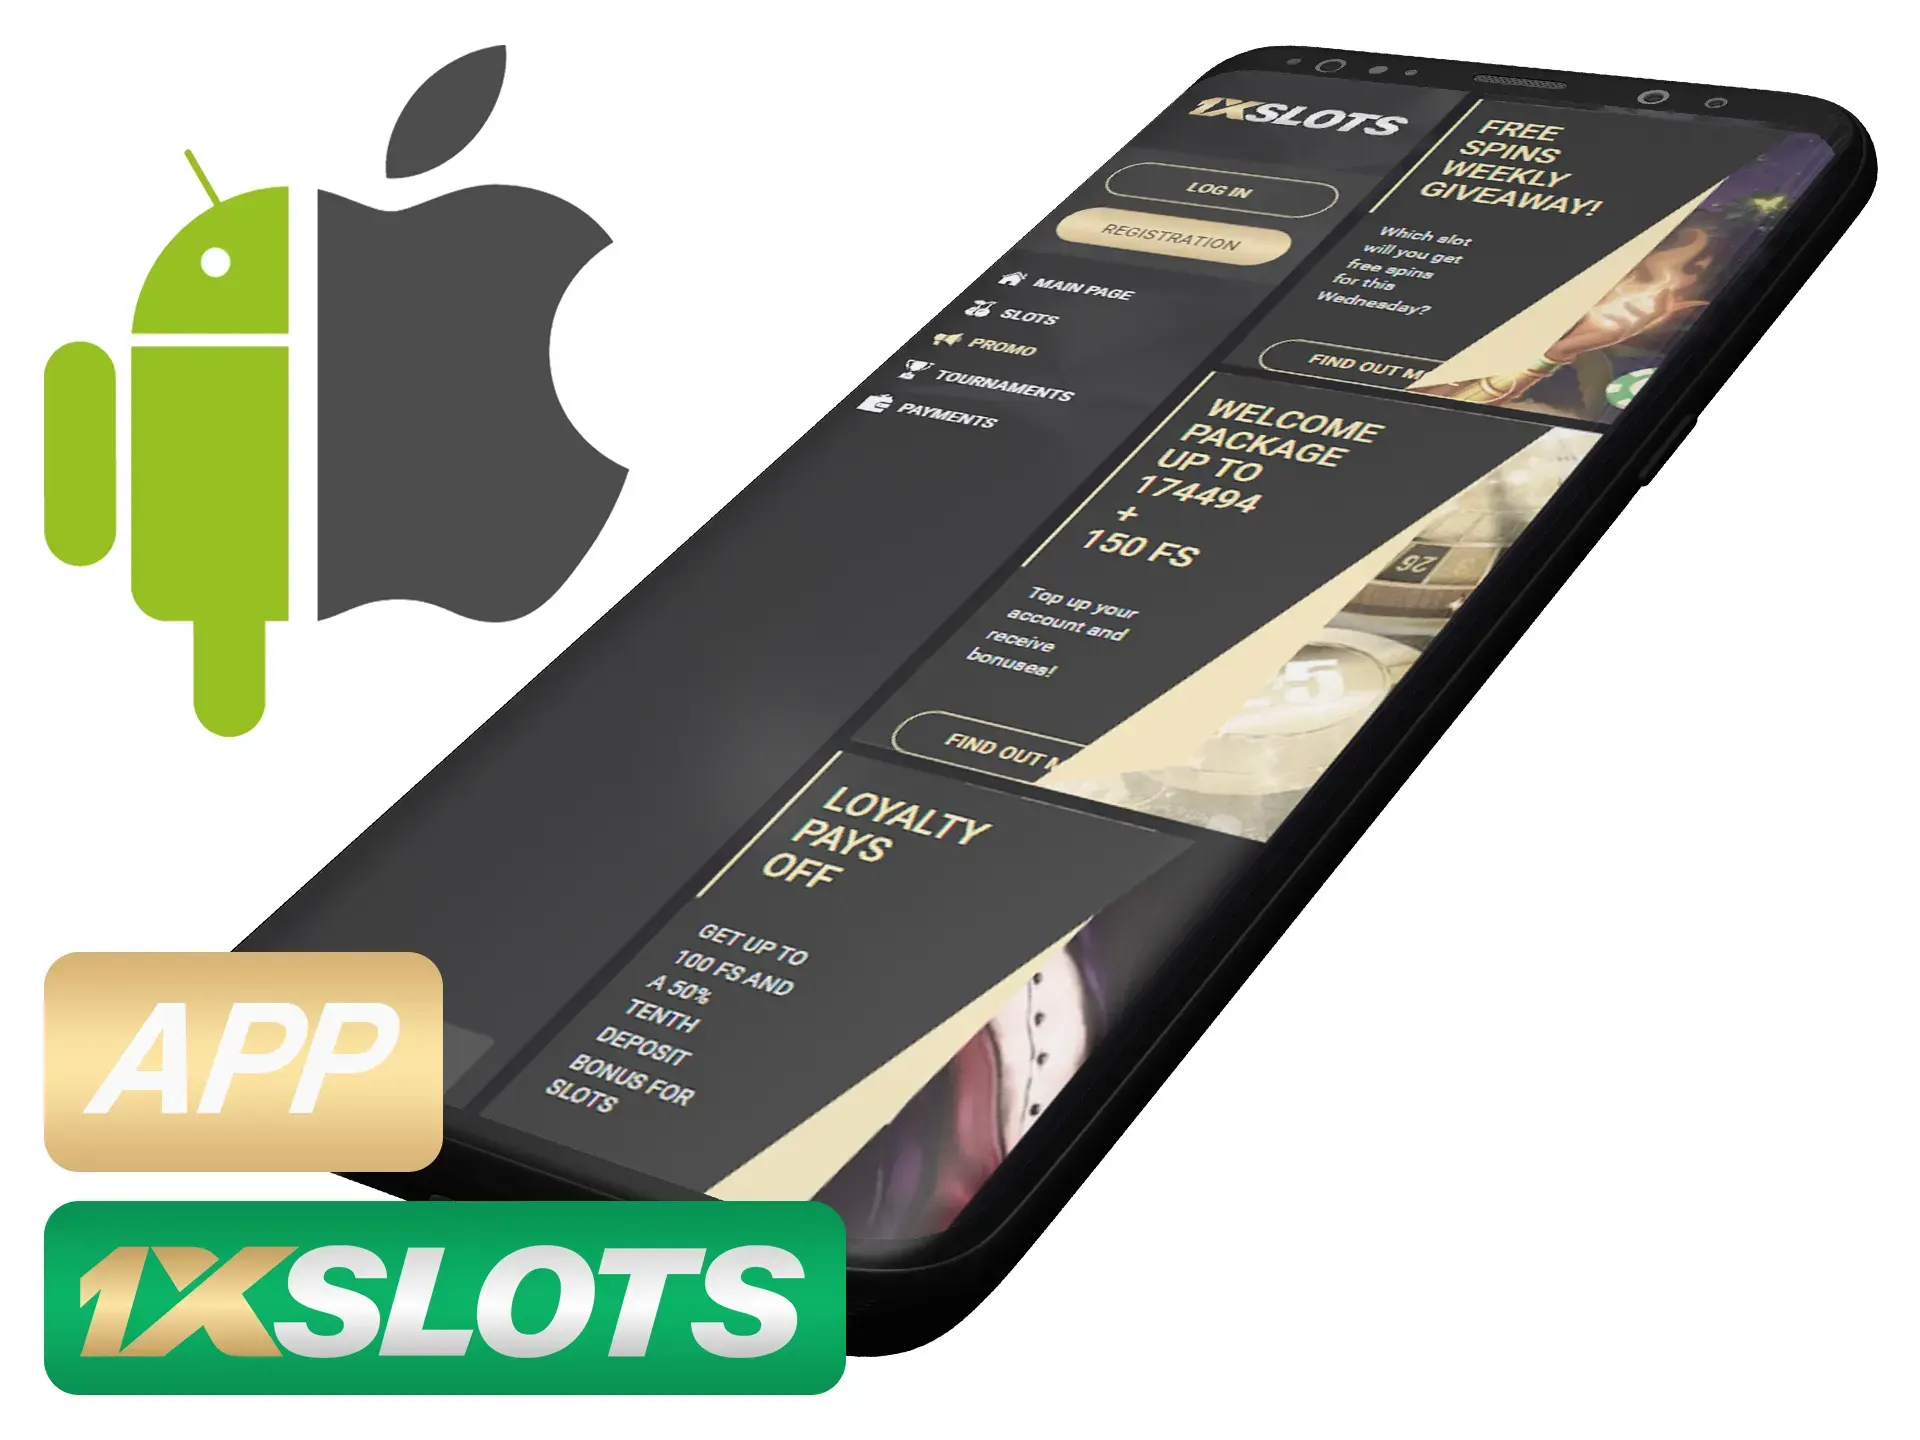 The 1xSlots app is very easy to use.